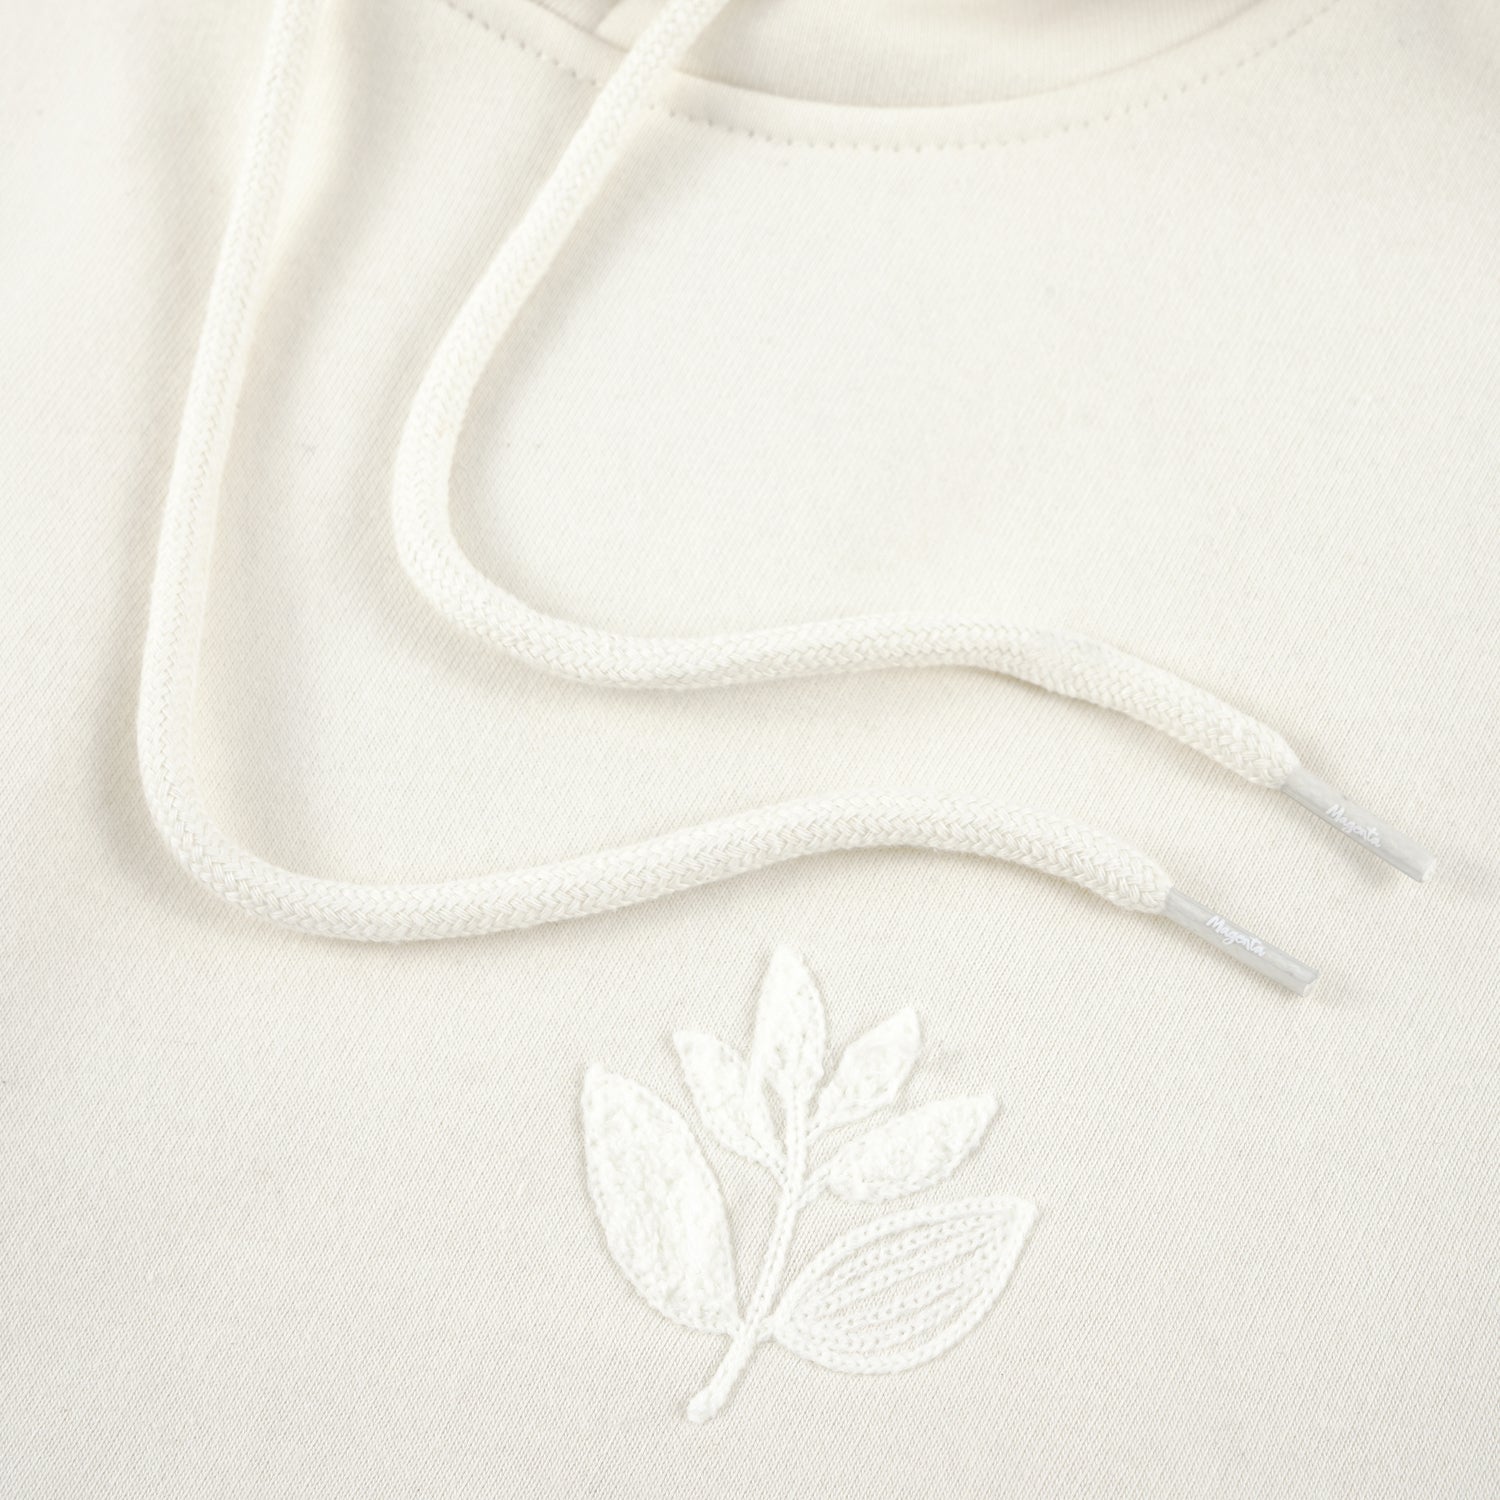 MAGENTA SKATEBOARDS - TERRY PLANT HOODIE "Natural"